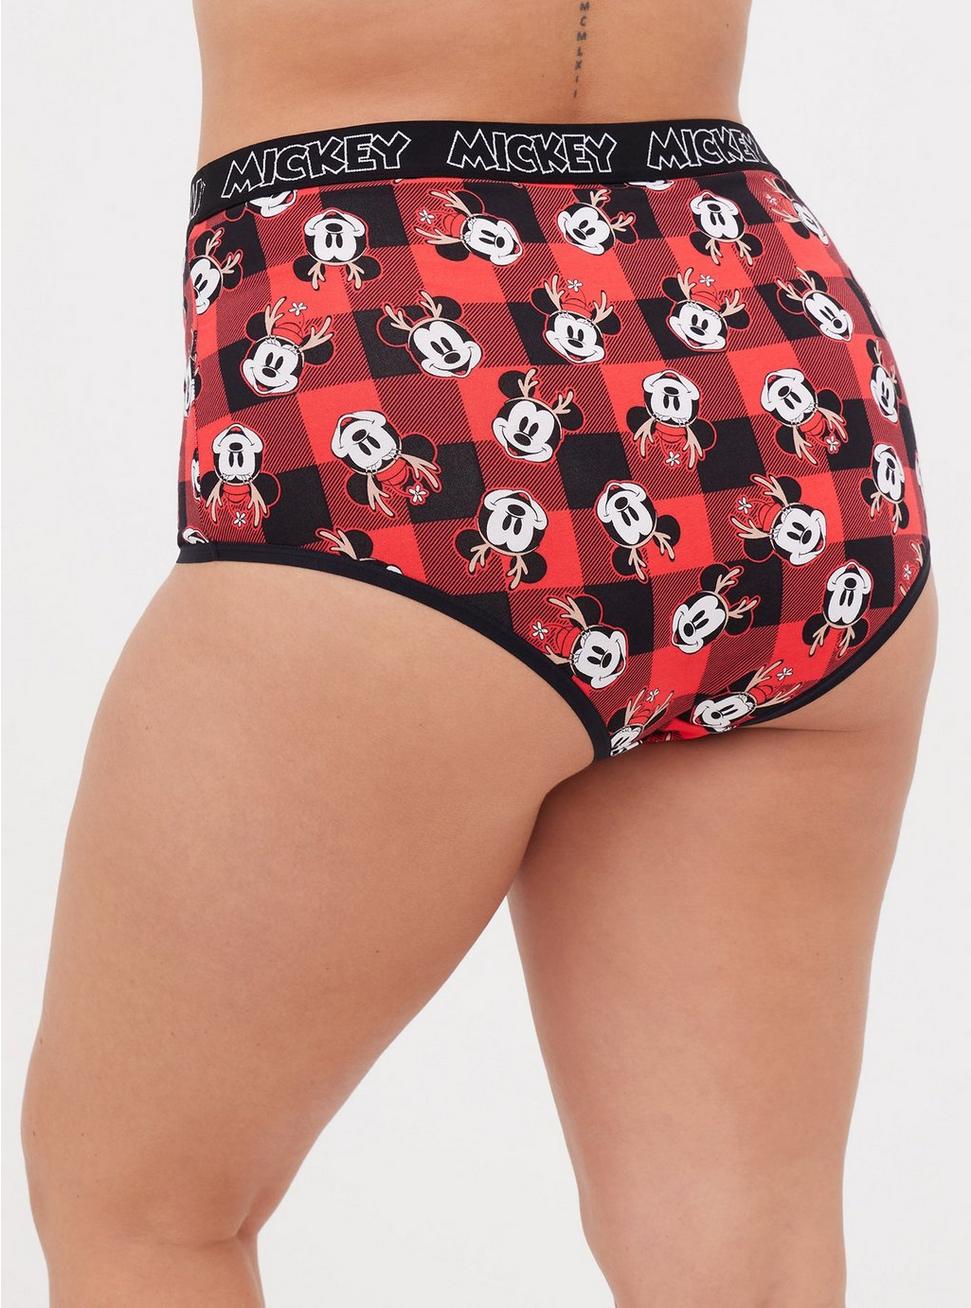 anna maria santos recommends mickey mouse panty hose pic